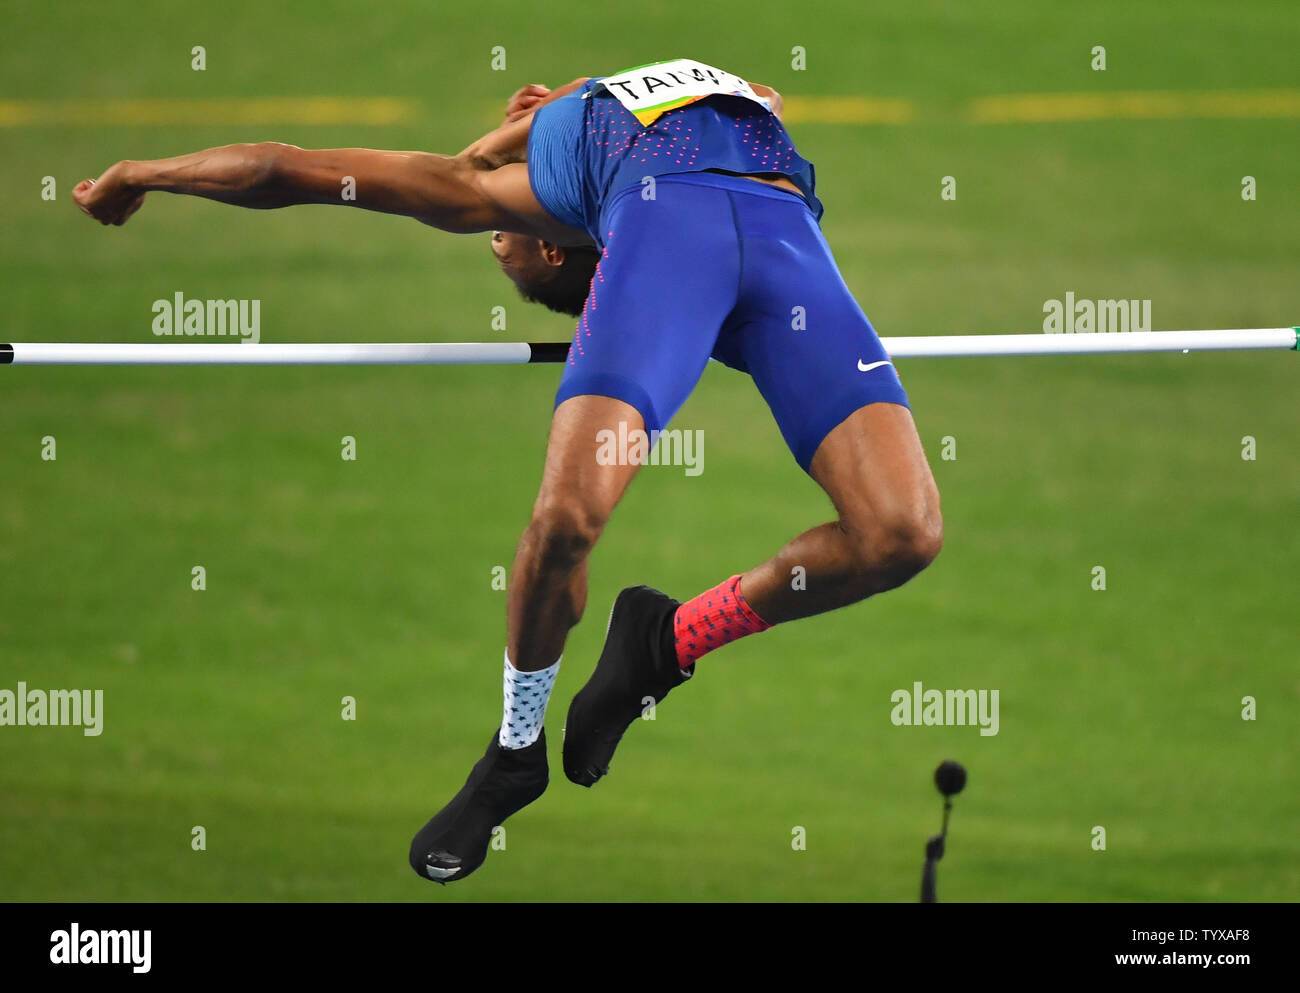 Jeremy Taiwo of the United States competes in the Men's High Jump at the Olympic Stadium at the 2016 Rio Summer Olympics in Rio de Janeiro, Brazil, on August 17, 2016.        Photo by Kevin Dietsch/UPI Stock Photo